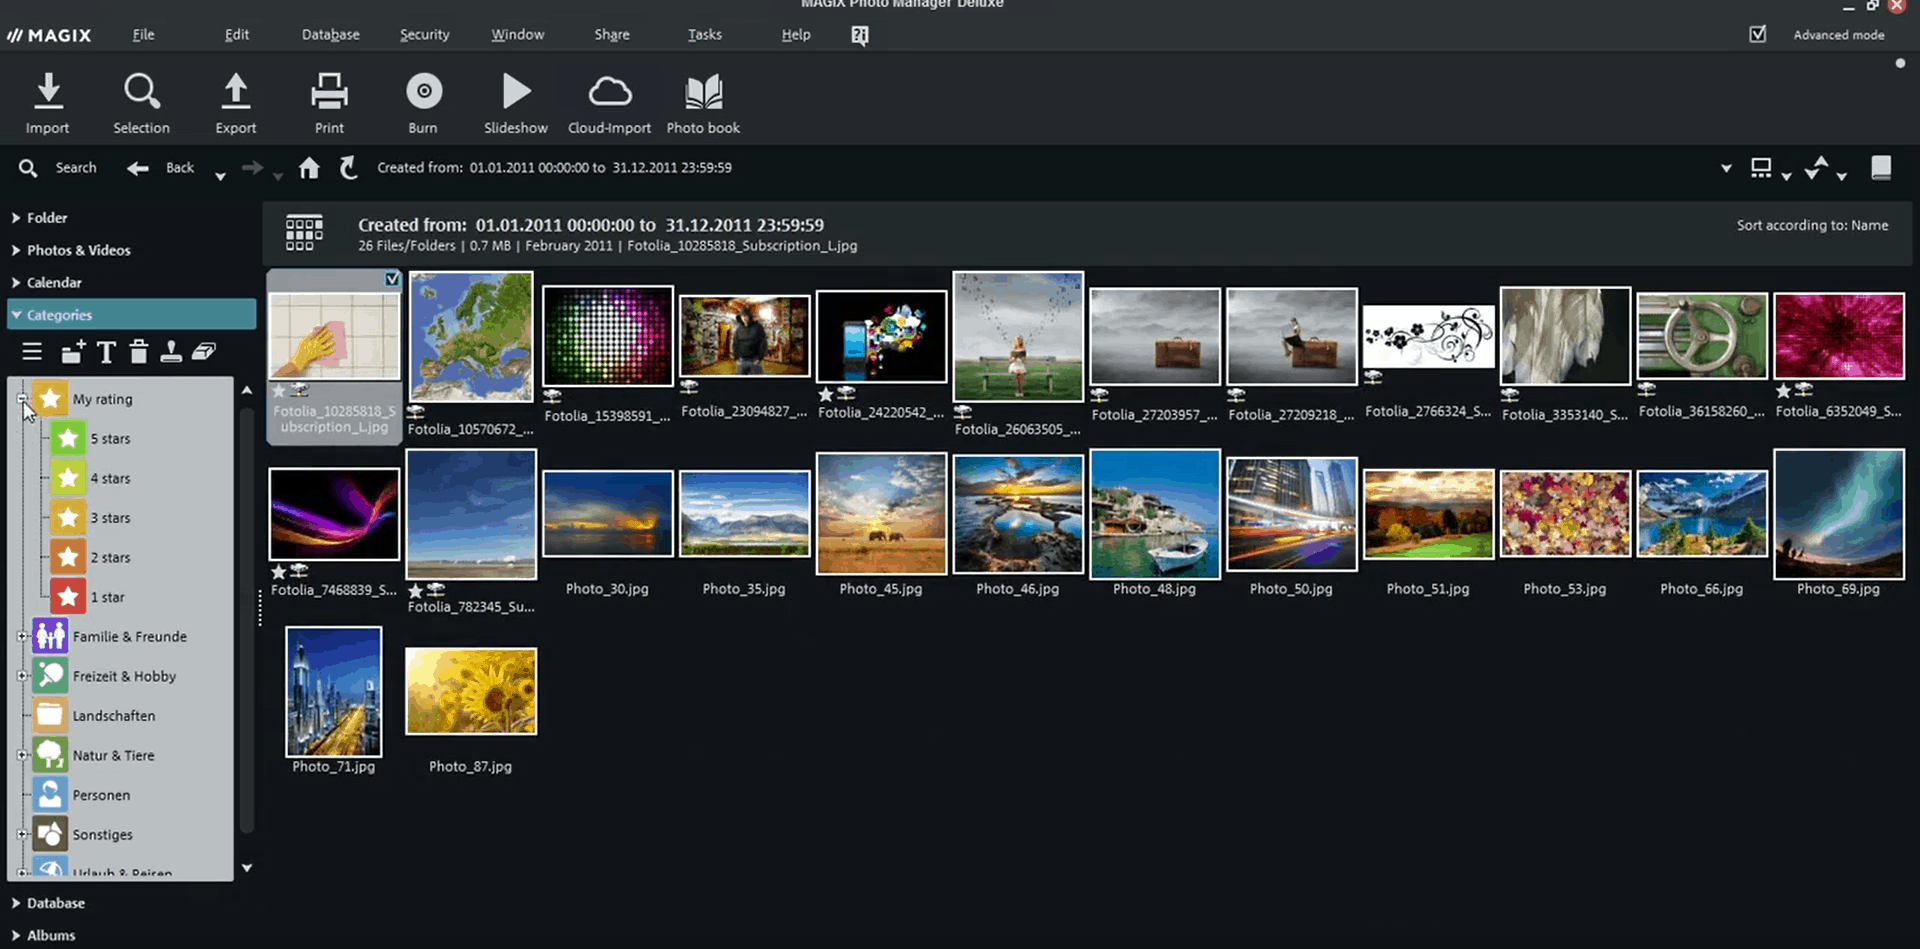 photo management software - MAGIX Photo Manager Deluxe